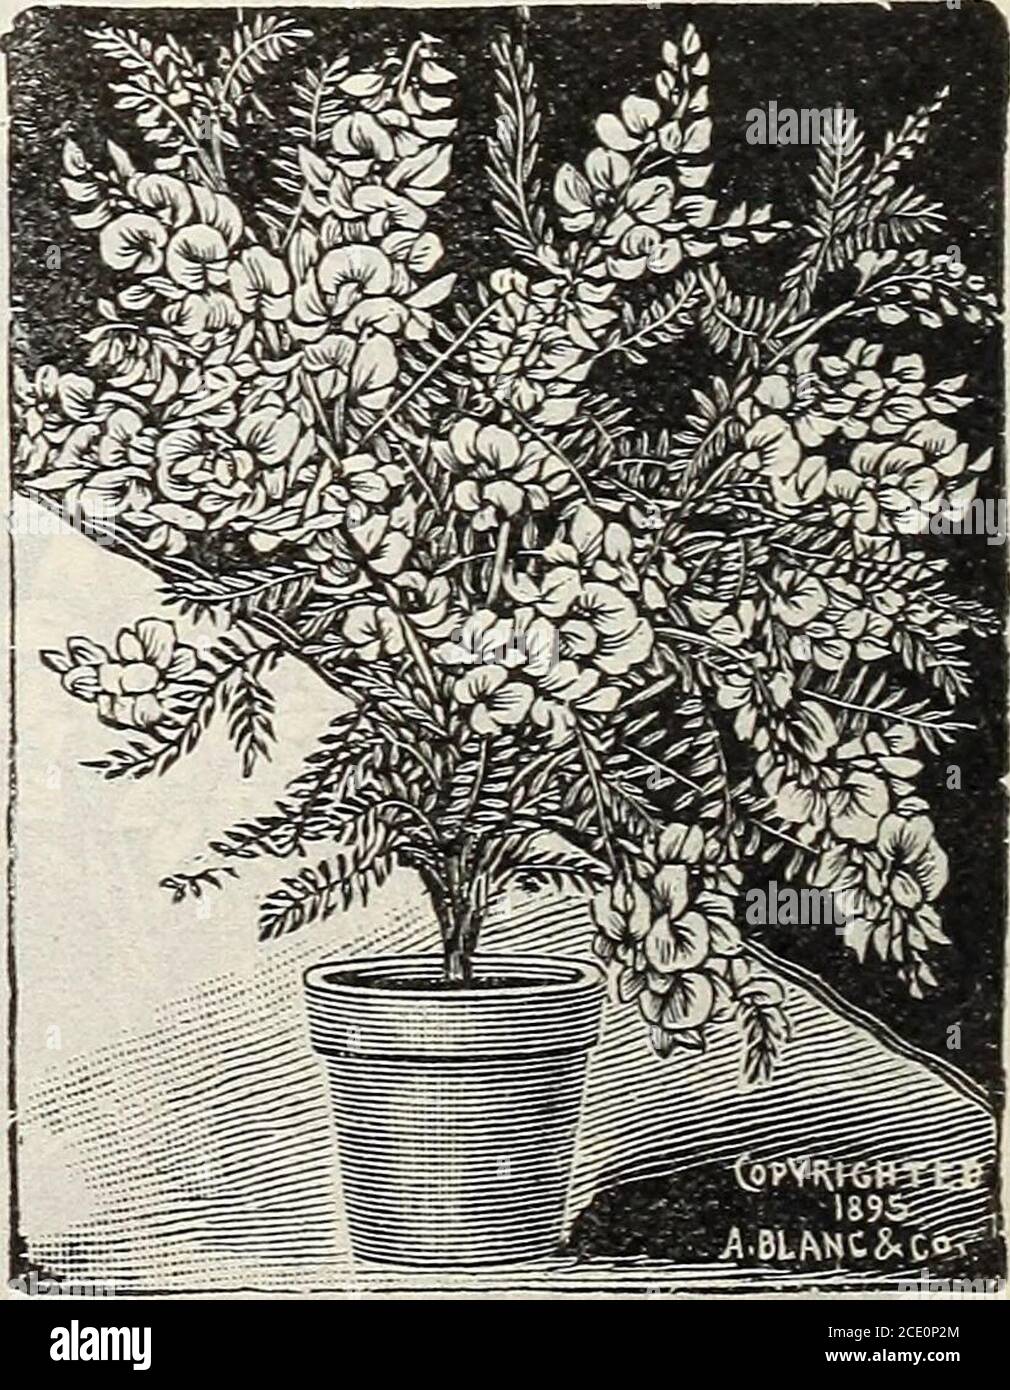 . New floral guide : autumn 1903 . condition.As easy to grow as a geranium ; will thrive and bloom with only themost ordinary care. When making up your order for house plants donot forget to include the beautiful Swan Flowers. We offer twosplendid varieties. Swainsonia Alba-Large snowy white blossoms, in long pendant clusters; very beautiful and fine for cutting. 15 cts. each, postpaid.Swainsonia Eosea—Same as Alba except in color, which is bright rich rosy red. Very handsome. 15 cts. each. The two beautiful Swan Flowers, 25 Cts., postpaid. Grevillea Robusta-^e-^ei^fJeSsf tive plant for house Stock Photo